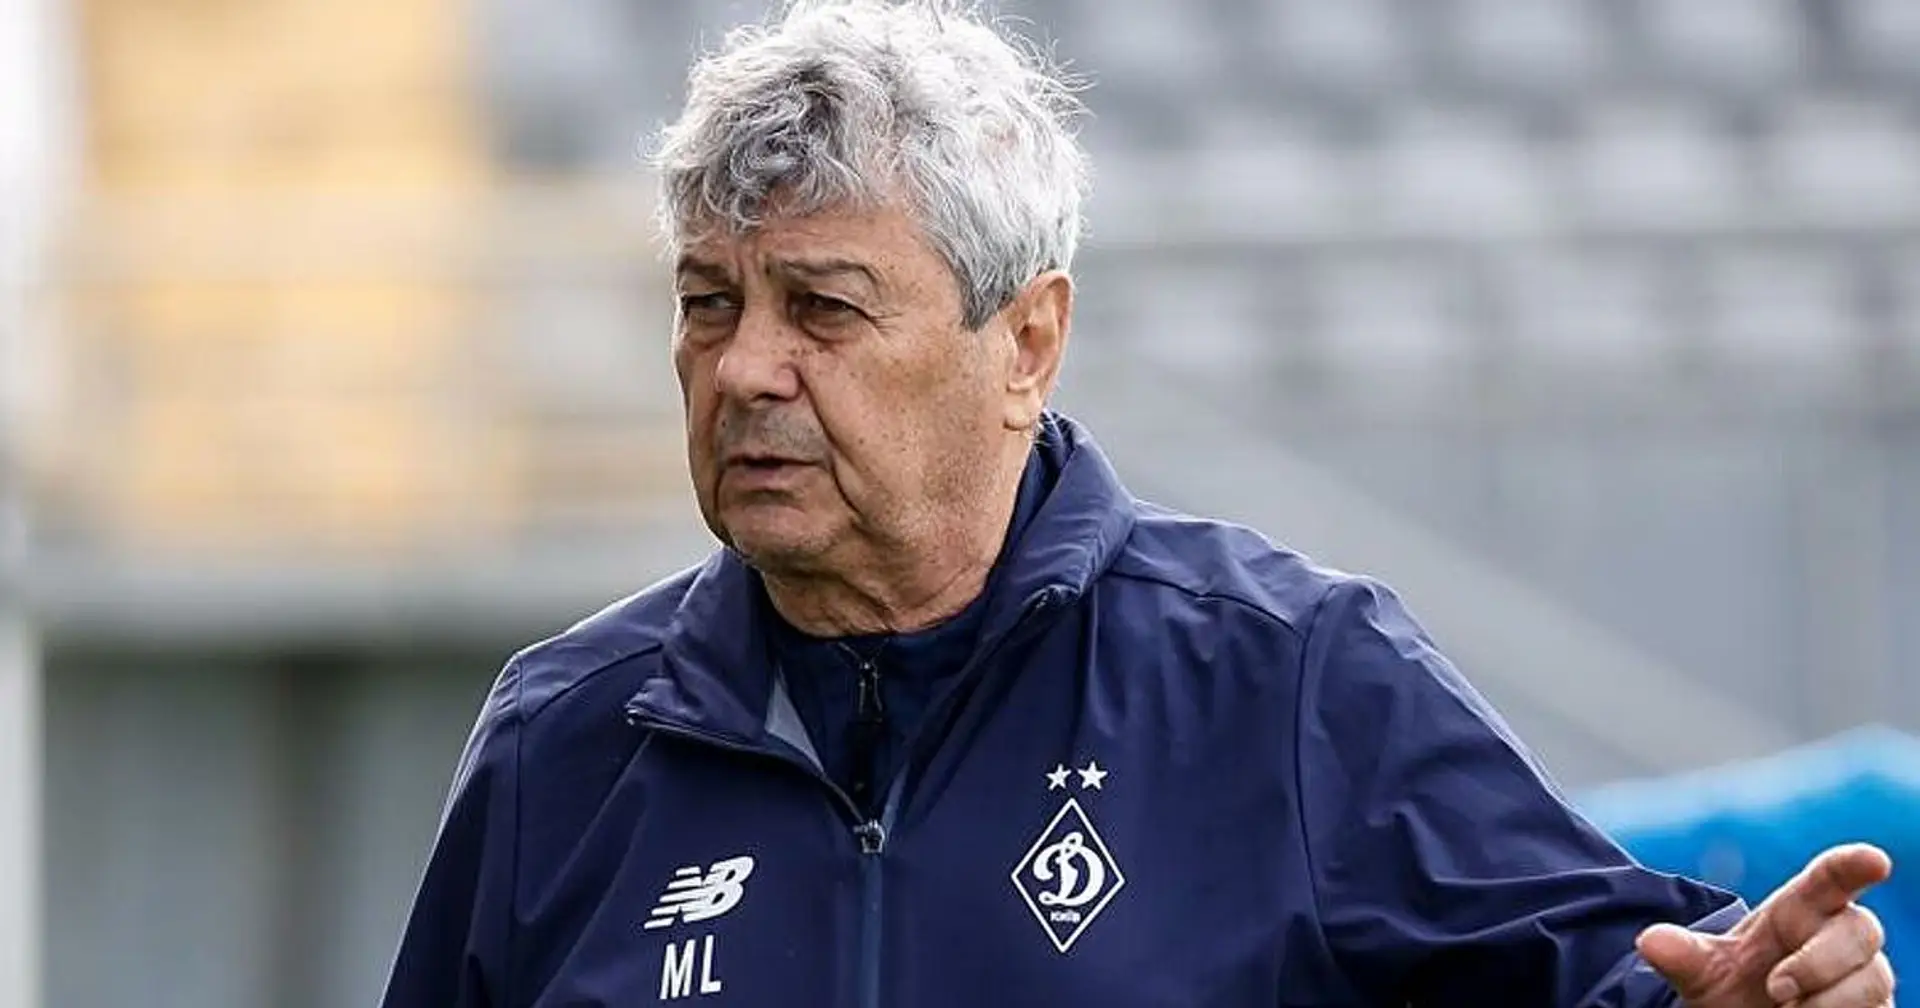 'I'm not a coward': Dynamo Kyiv manager Lucescu sends defiant message amid Russian invasion of Ukraine